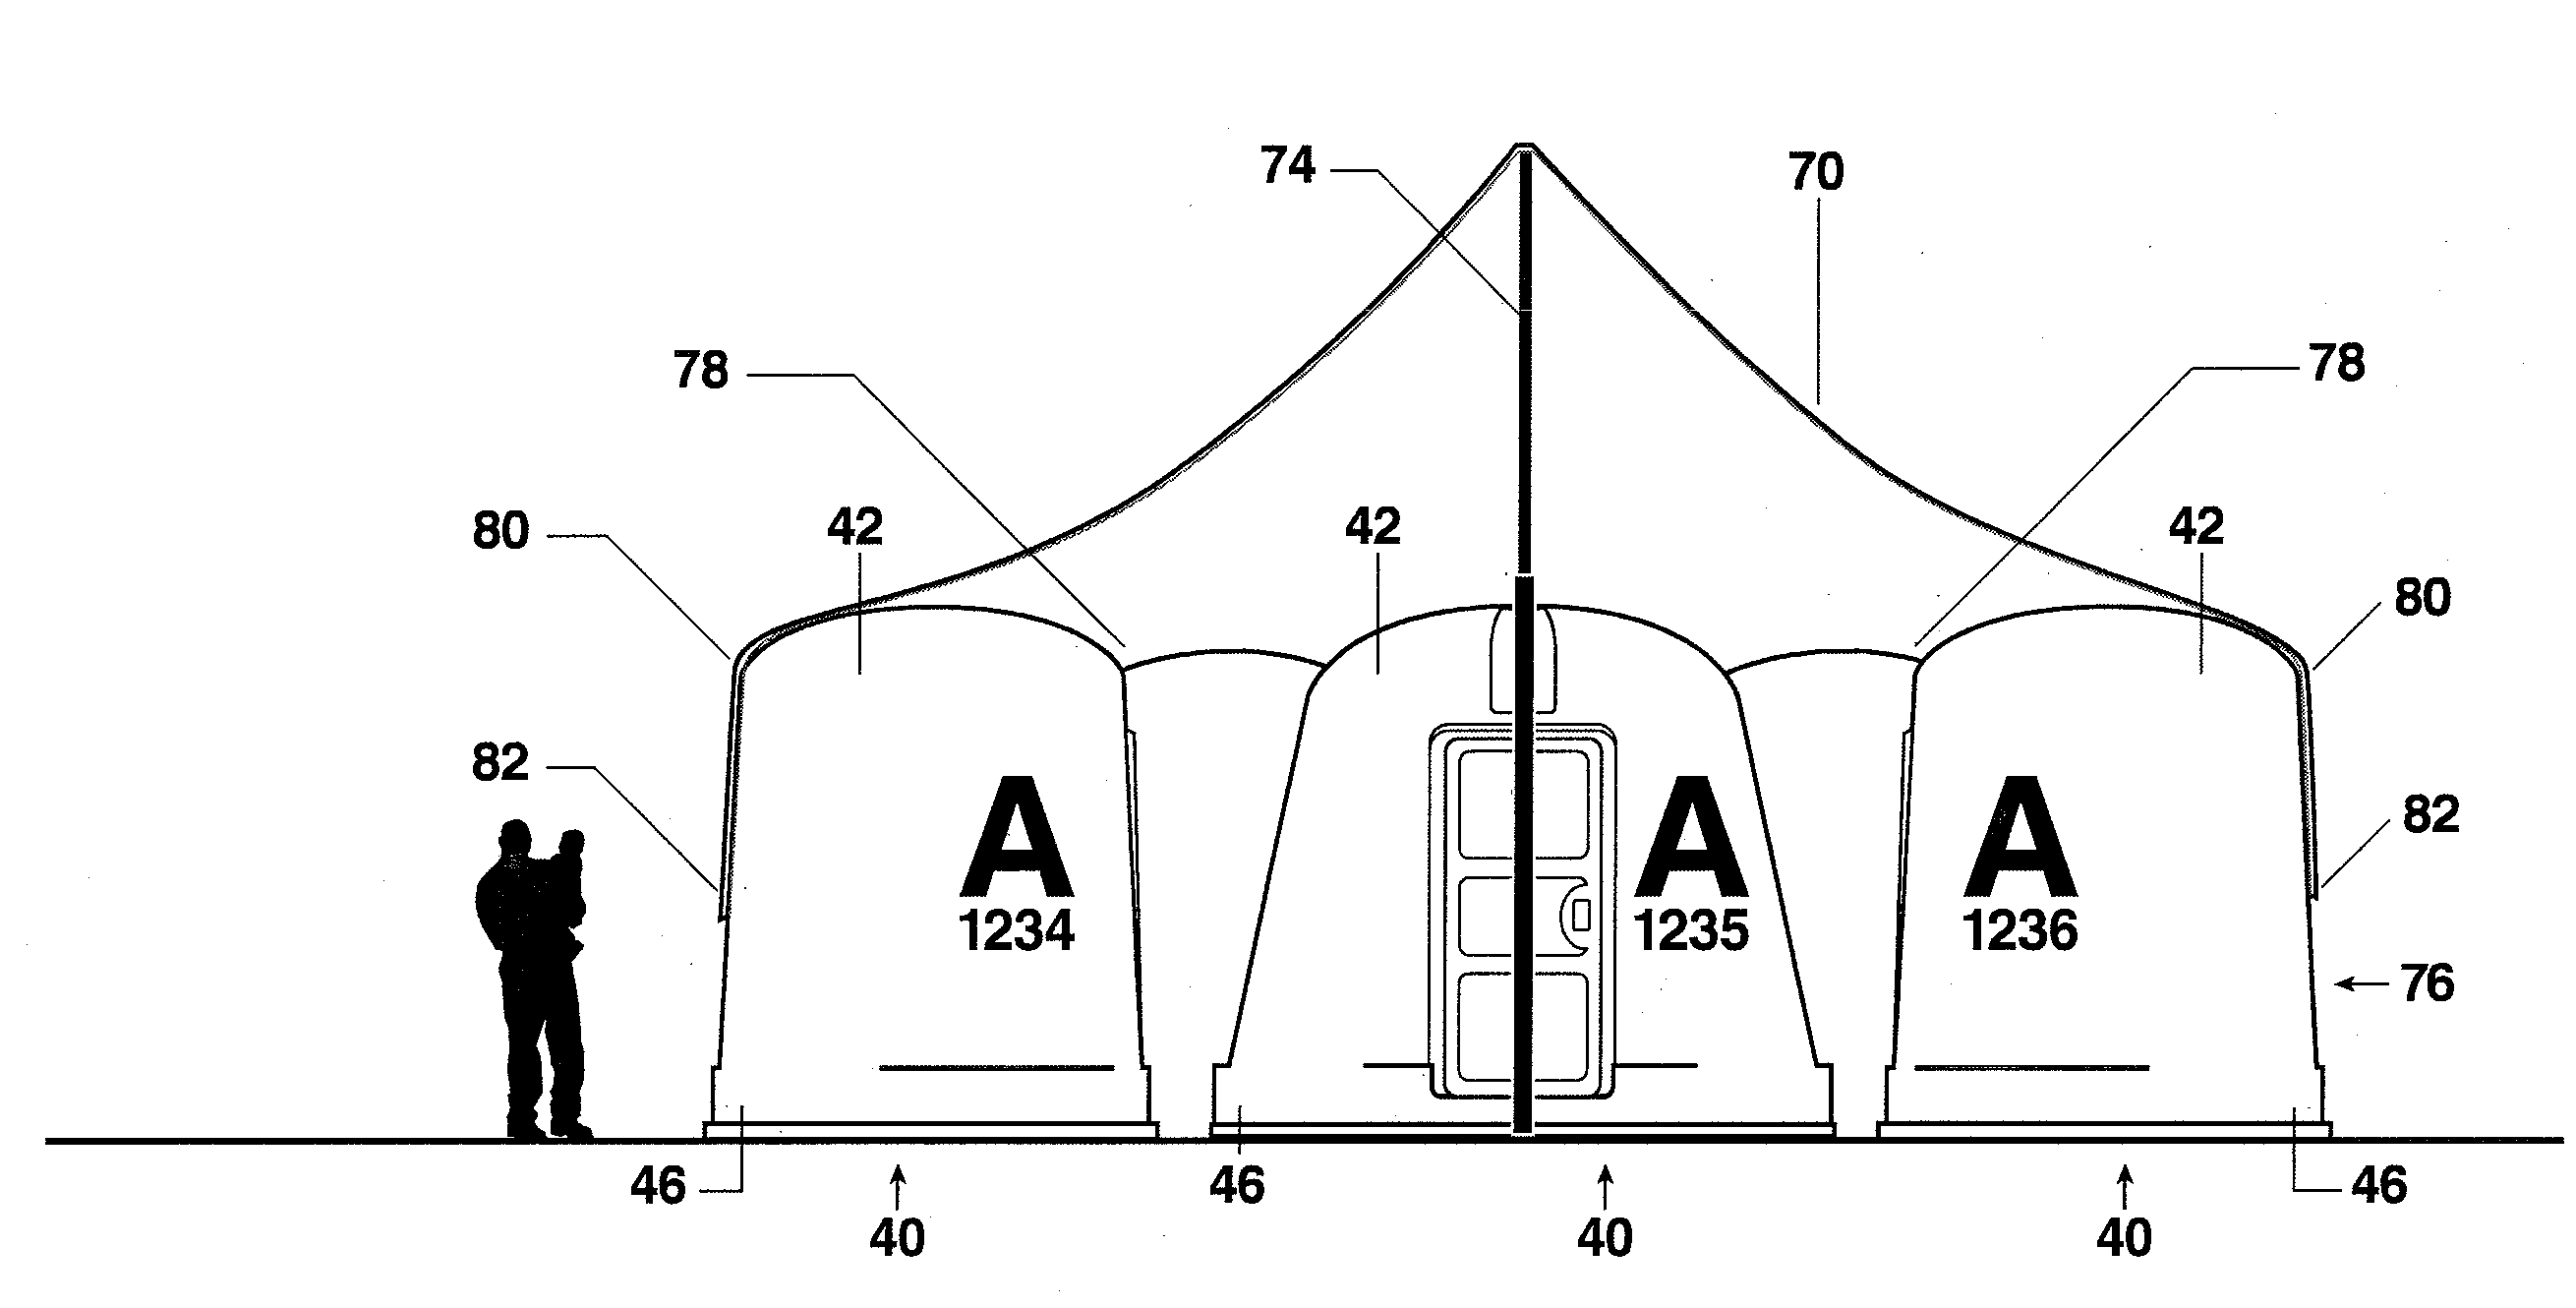 Portable shelters, related shelter systems, and methods of their deployment